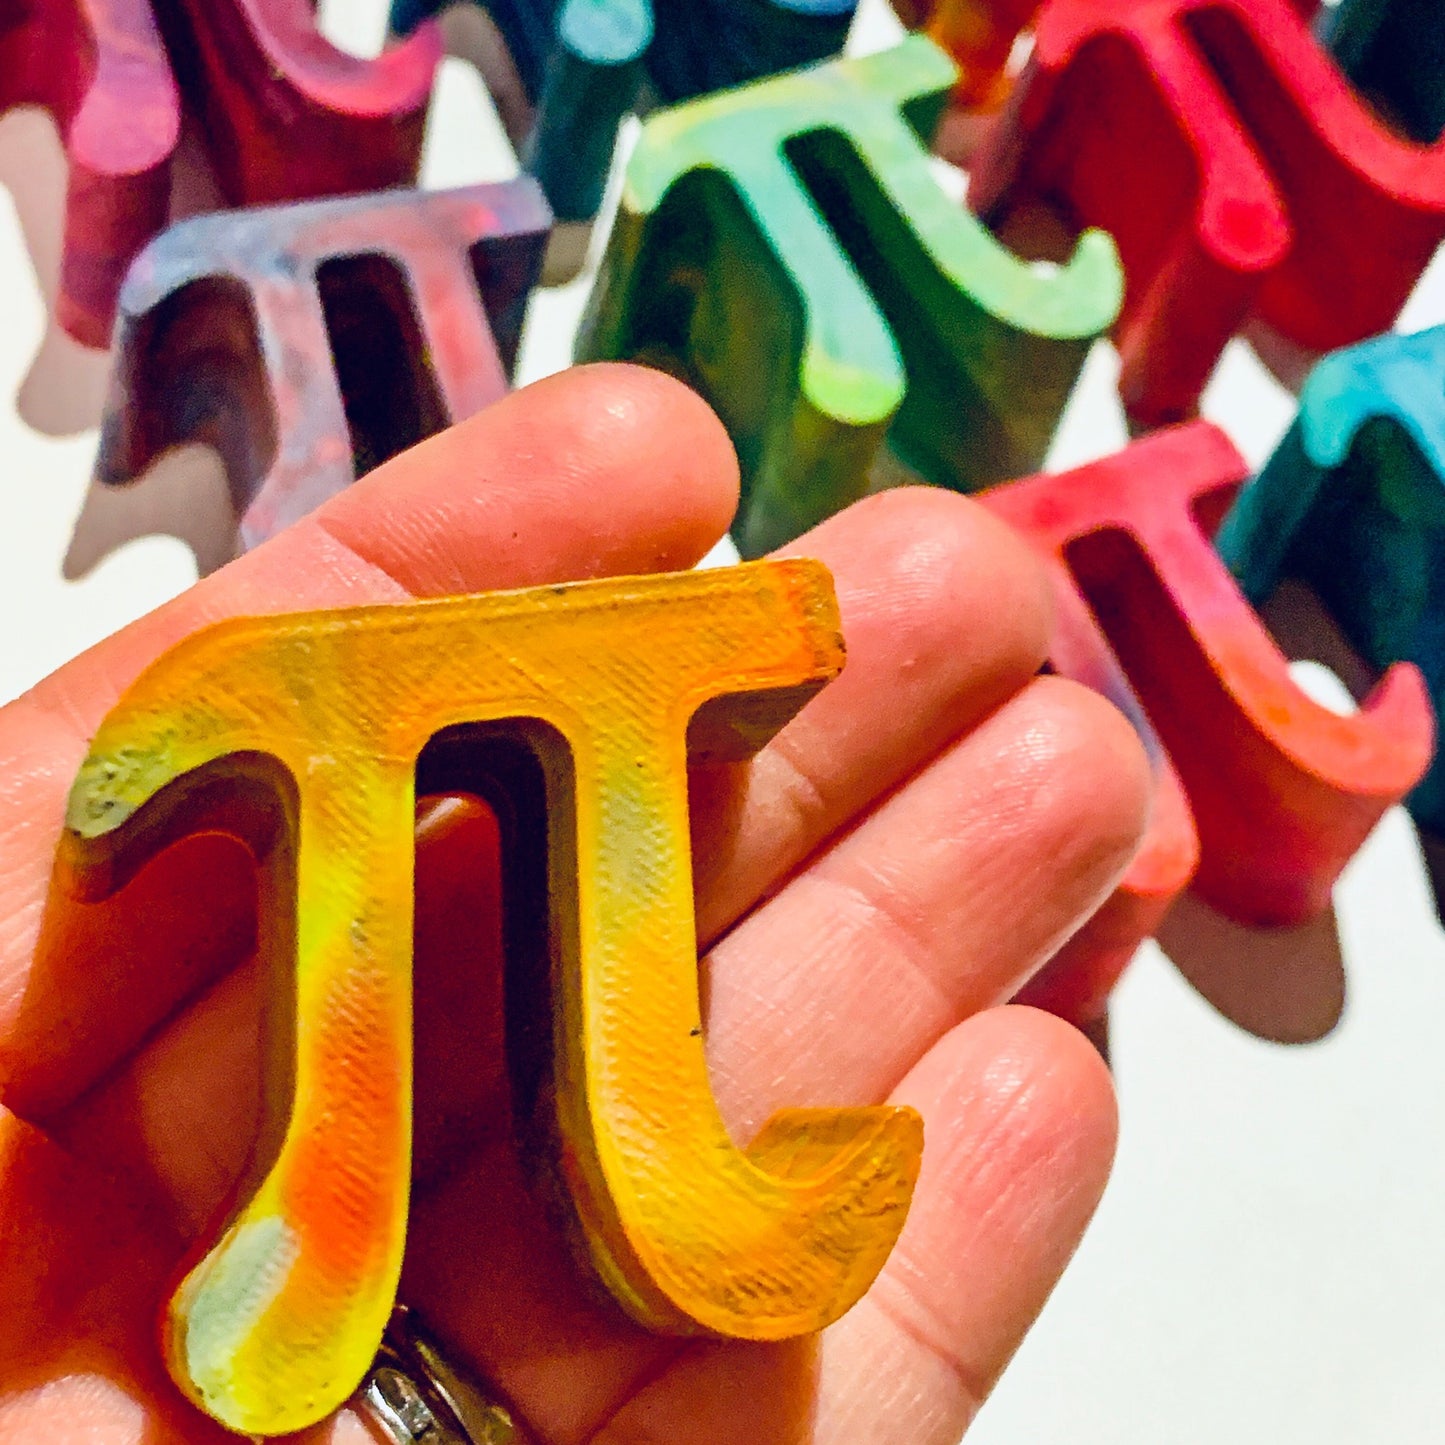 Pi Day activity rainbow crayons, Coloring crayons for Pi Day celebration , Pi shaped symbol crayons in rainbow colors